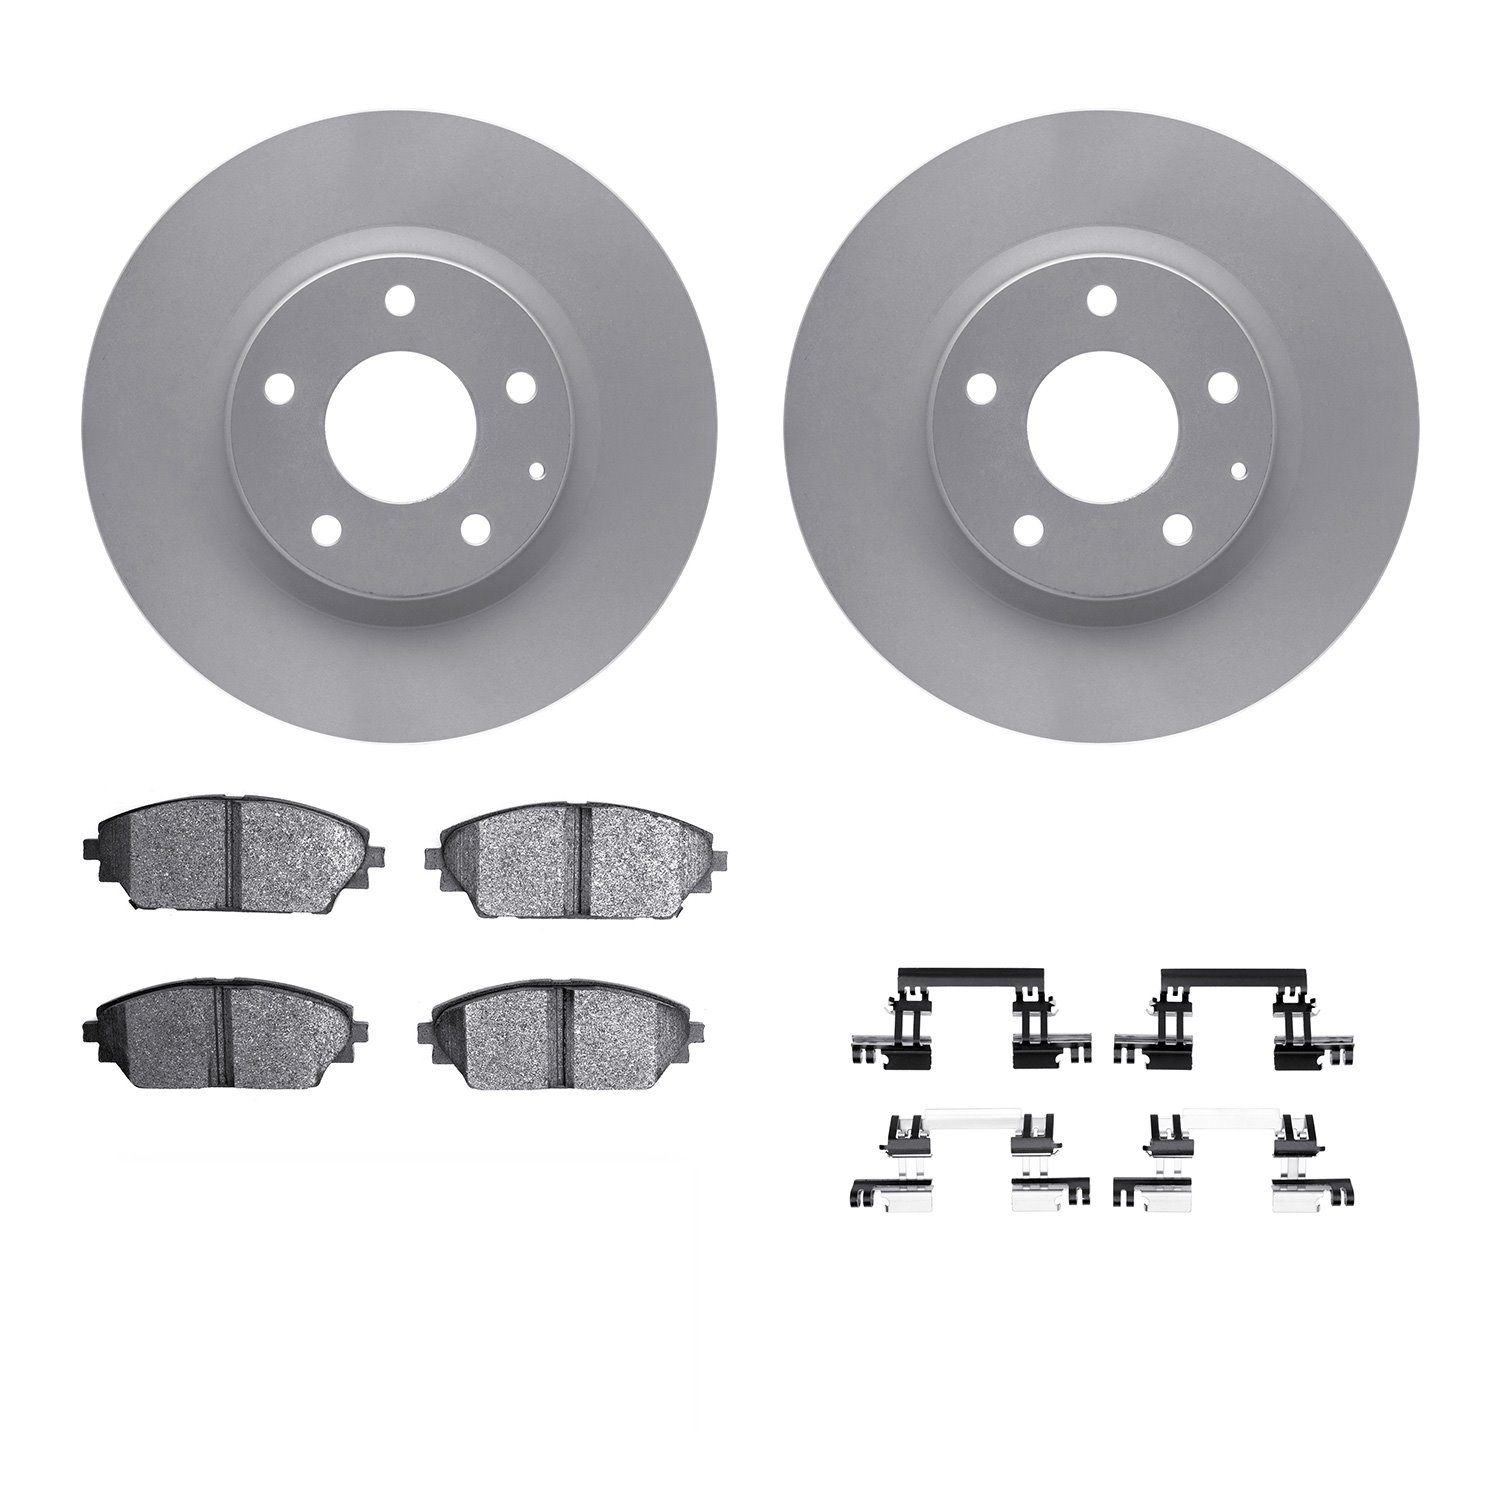 4312-80039 Geospec Brake Rotors with 3000-Series Ceramic Brake Pads & Hardware, Fits Select Ford/Lincoln/Mercury/Mazda, Position